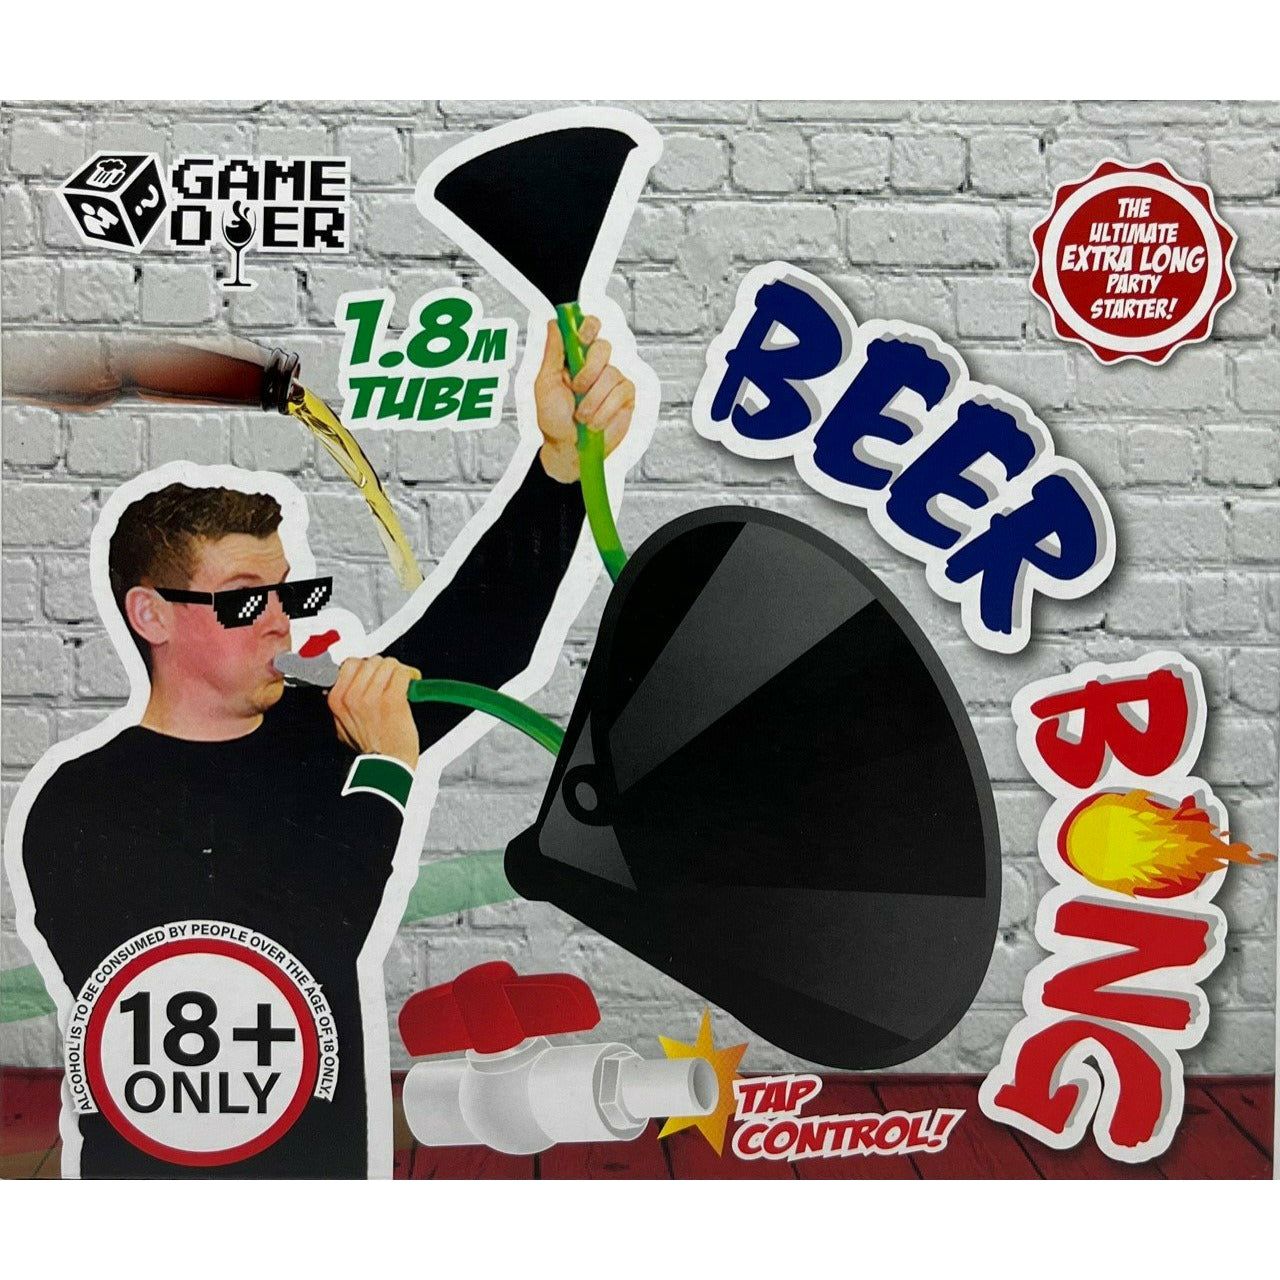 Beer Bong Funnel with Tap Control - 1.8m Tube 1 Piece - Dollars and Sense